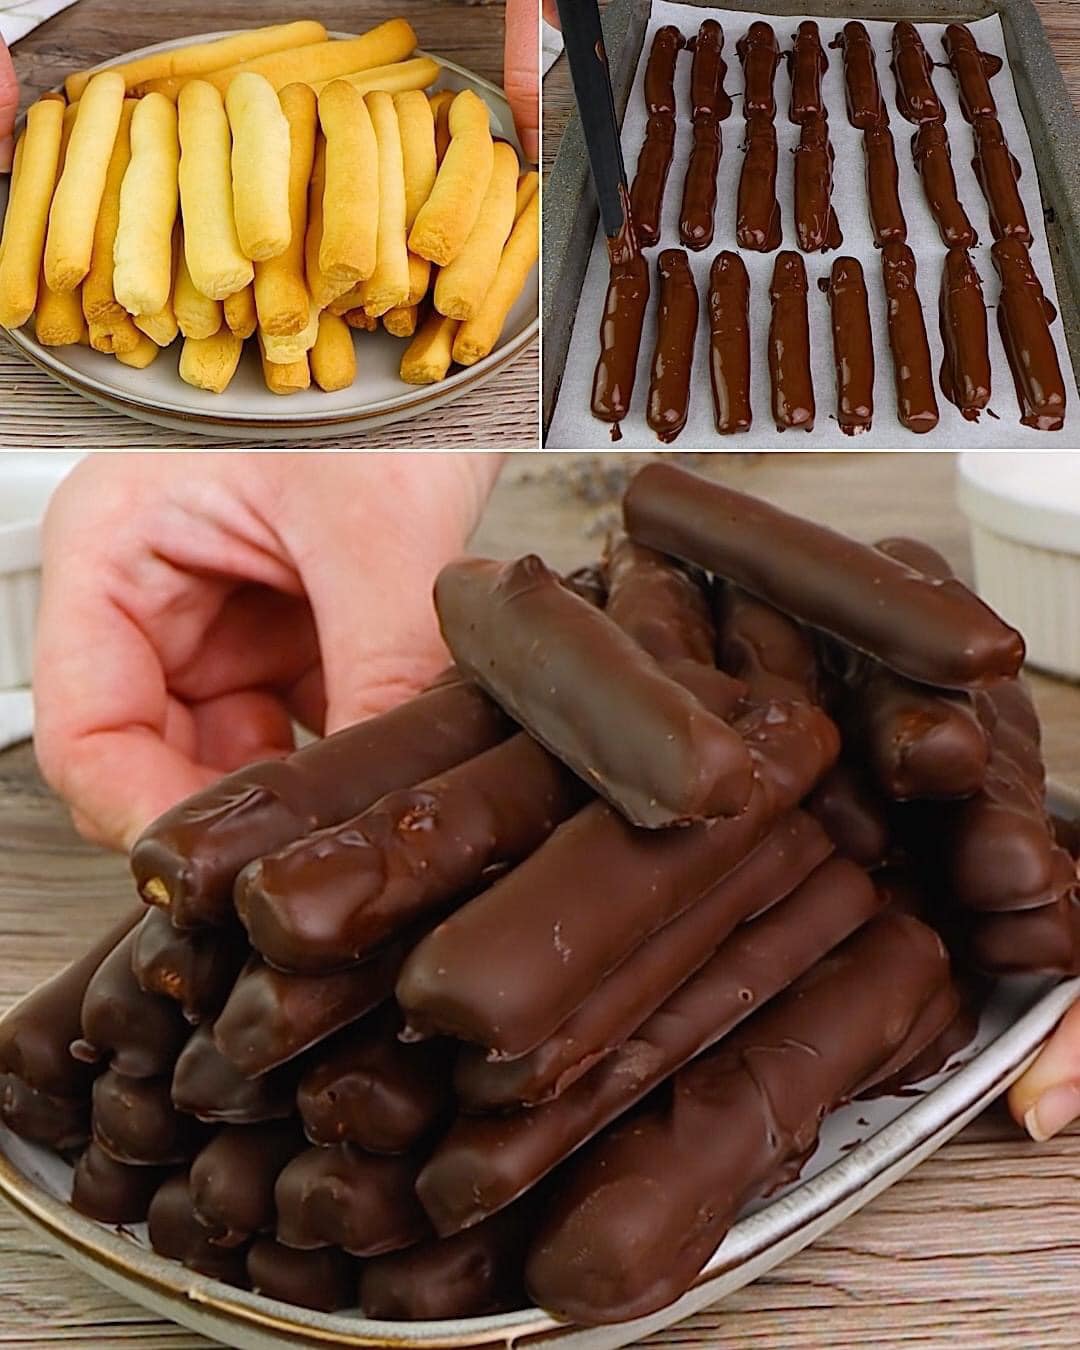 Chocolate sticks: the perfect treat to make at home